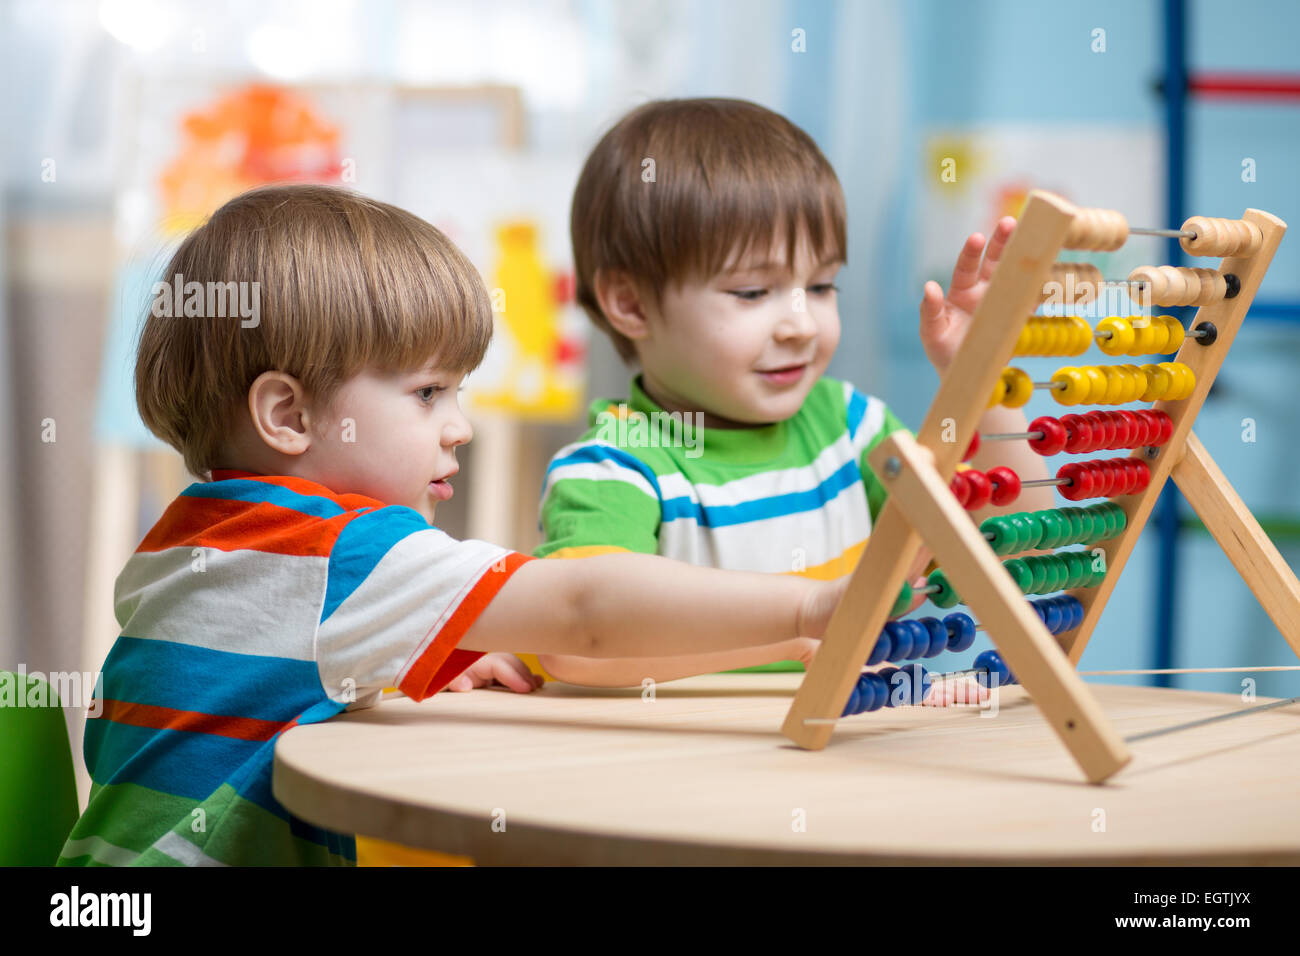 children playing with abacus Stock Photo